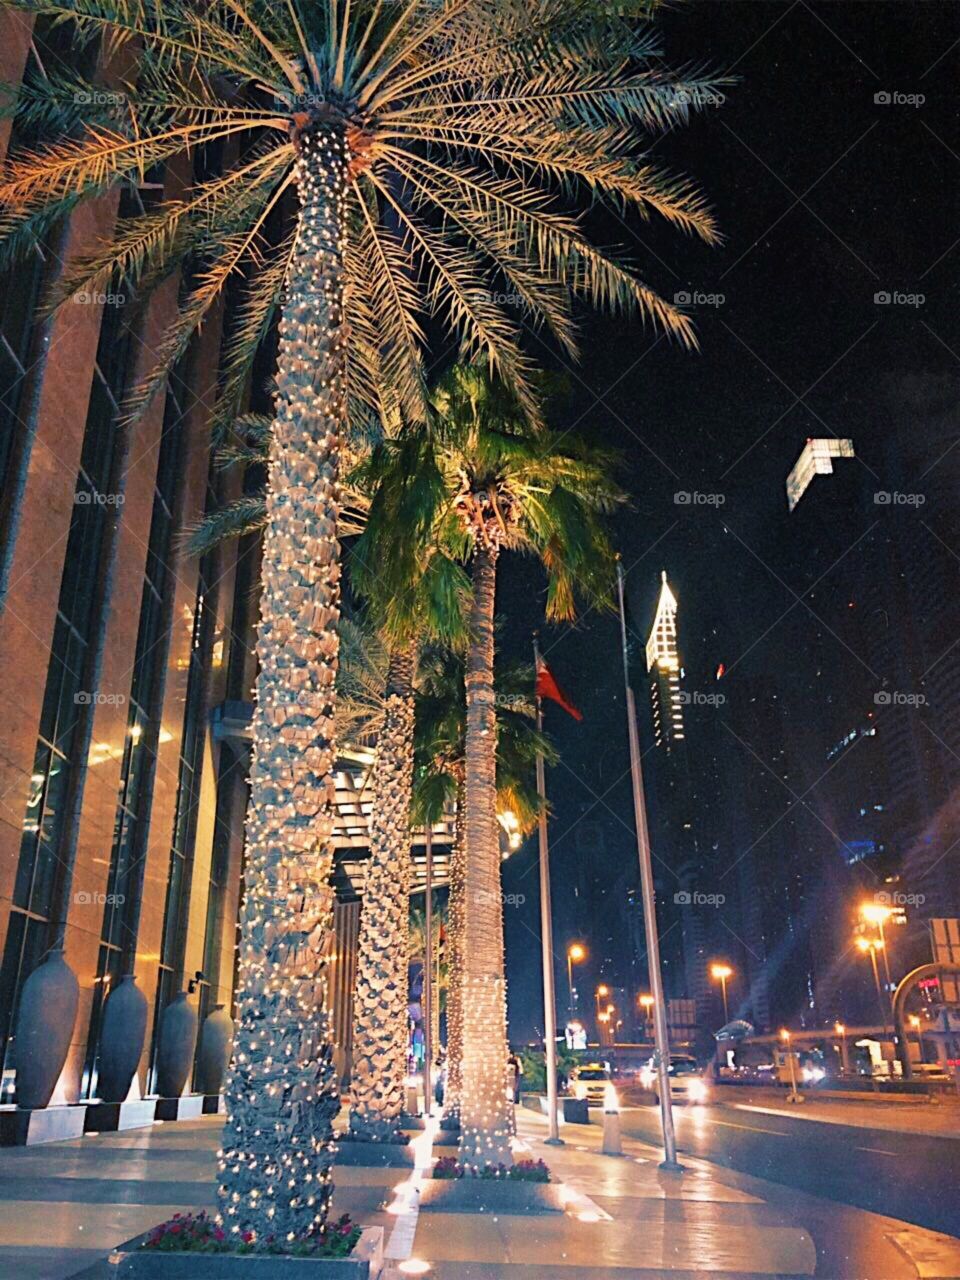 Palm trees in the city night